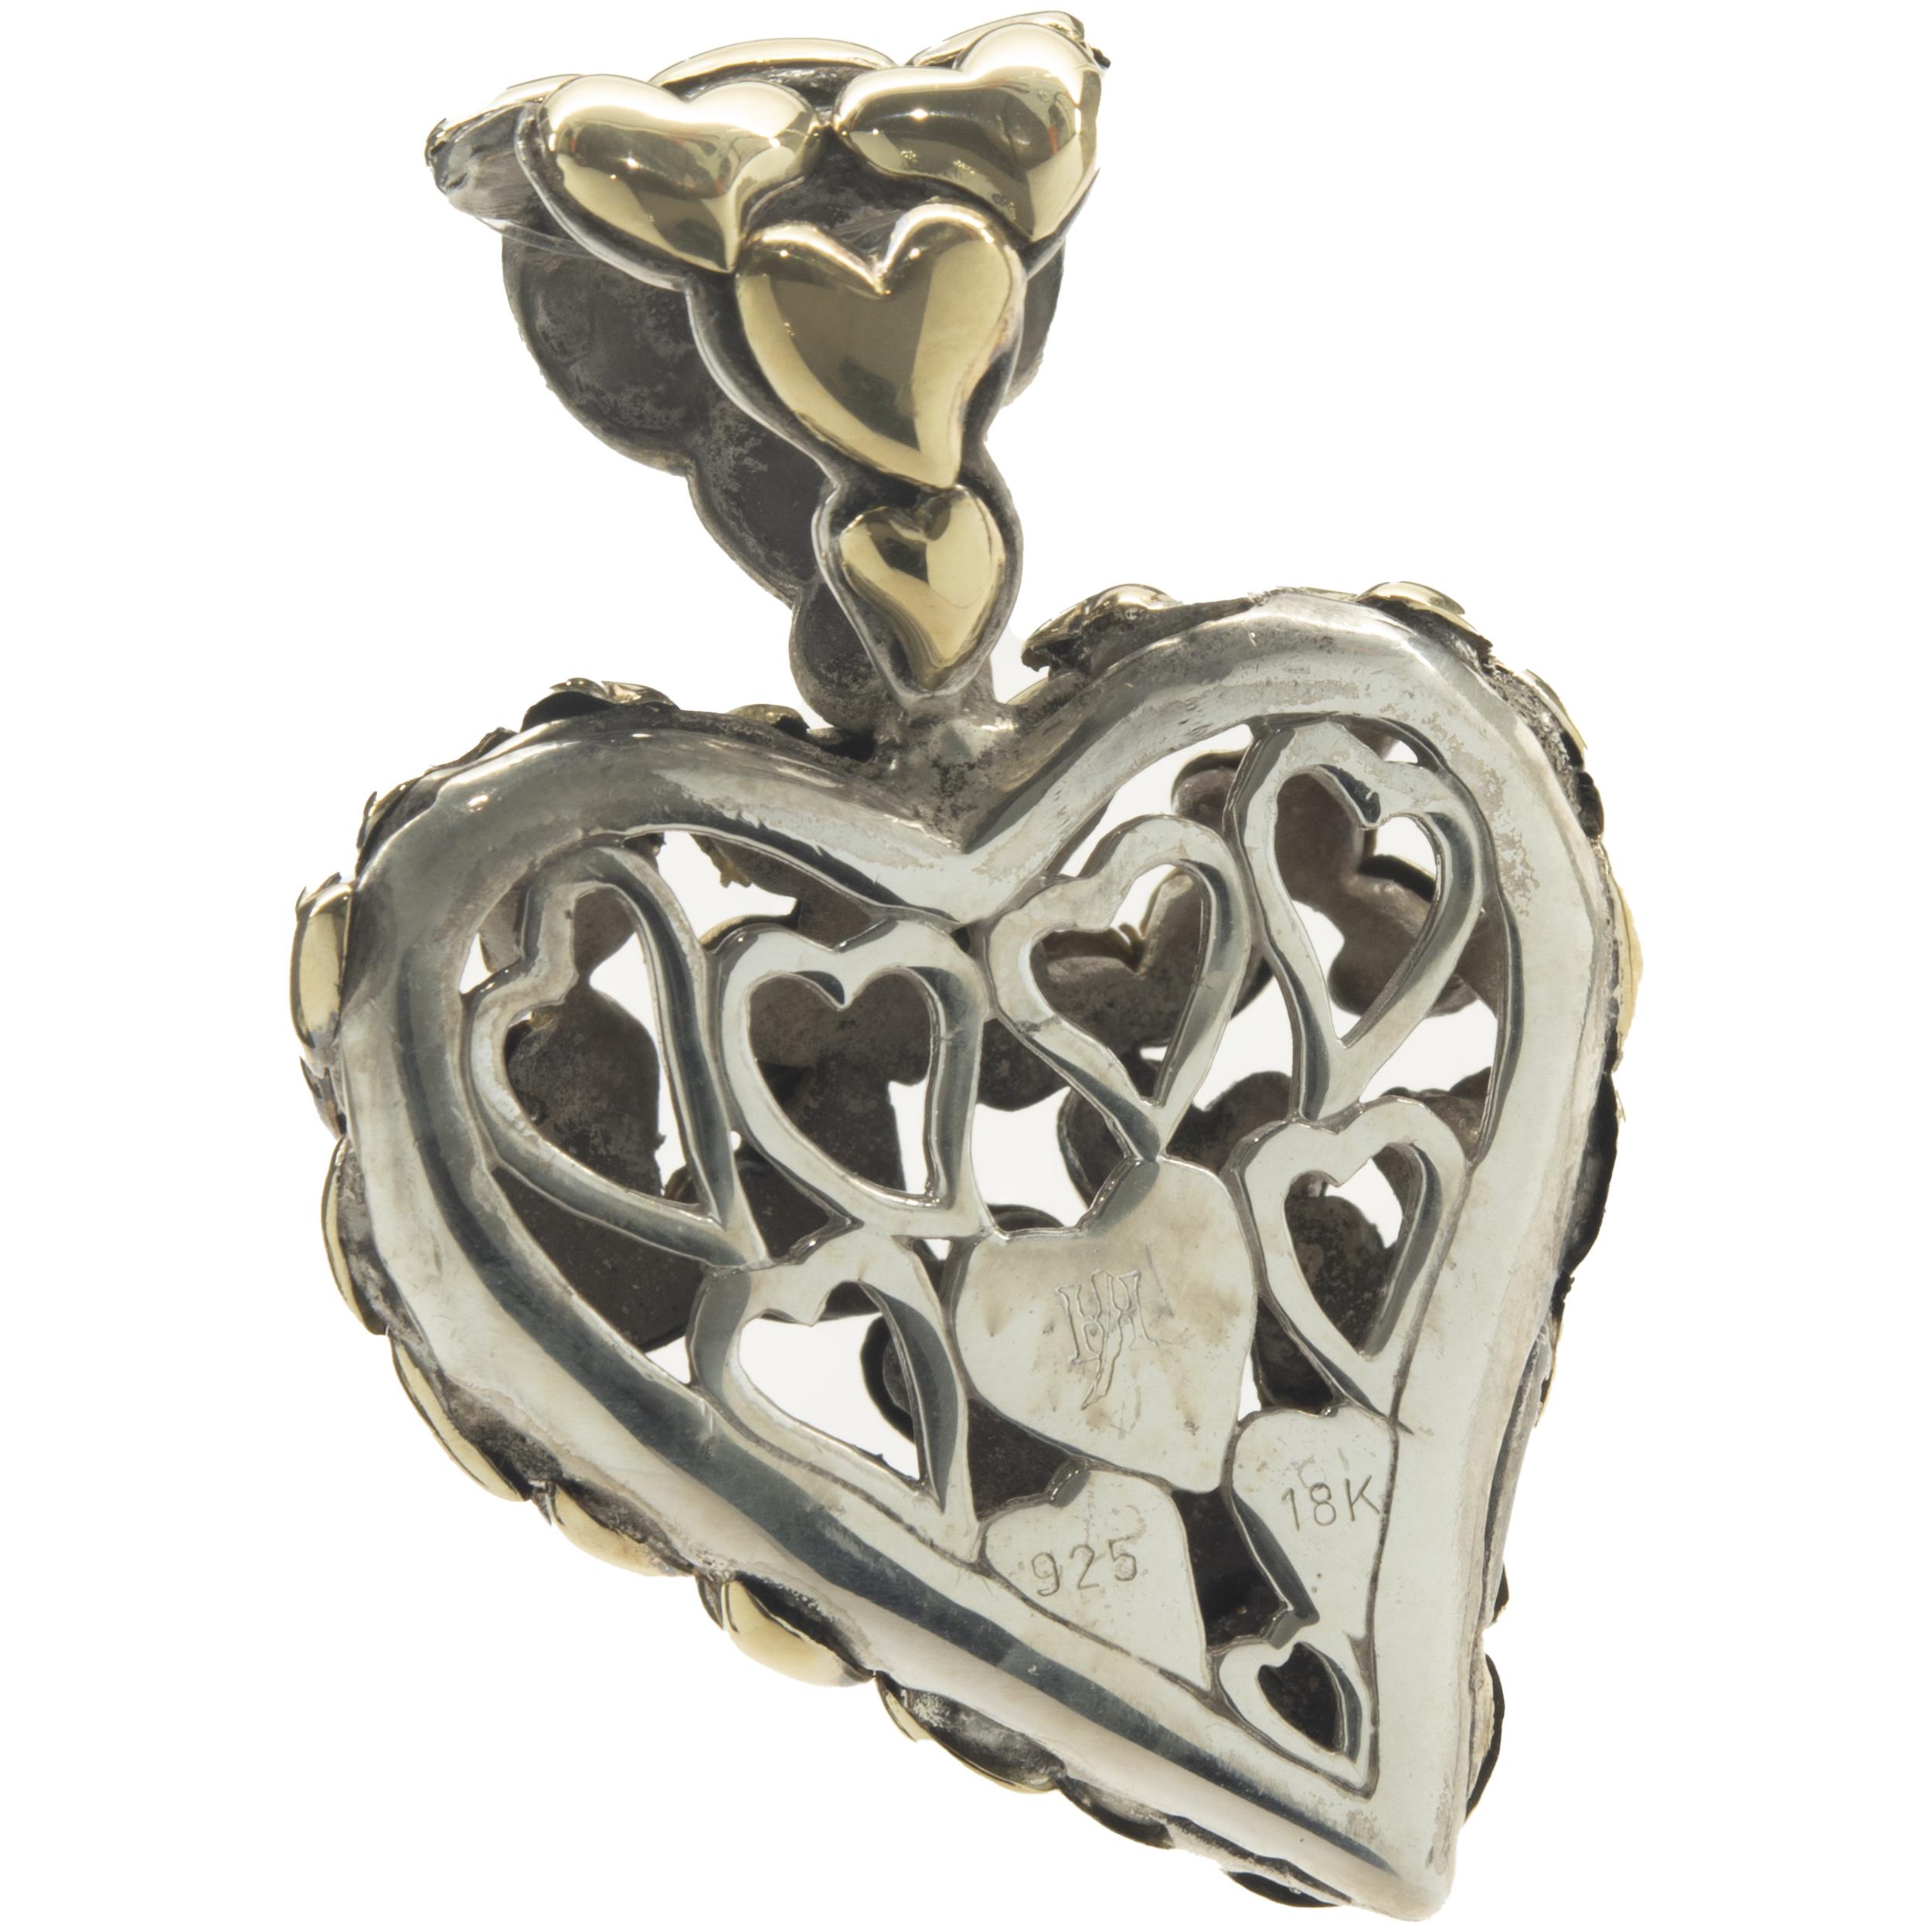 Designer: John Hardy
Material: Sterling Silver / 18K yellow gold
Dimensions: pendant measures 1.5-inches long
Weight: 12.25 grams